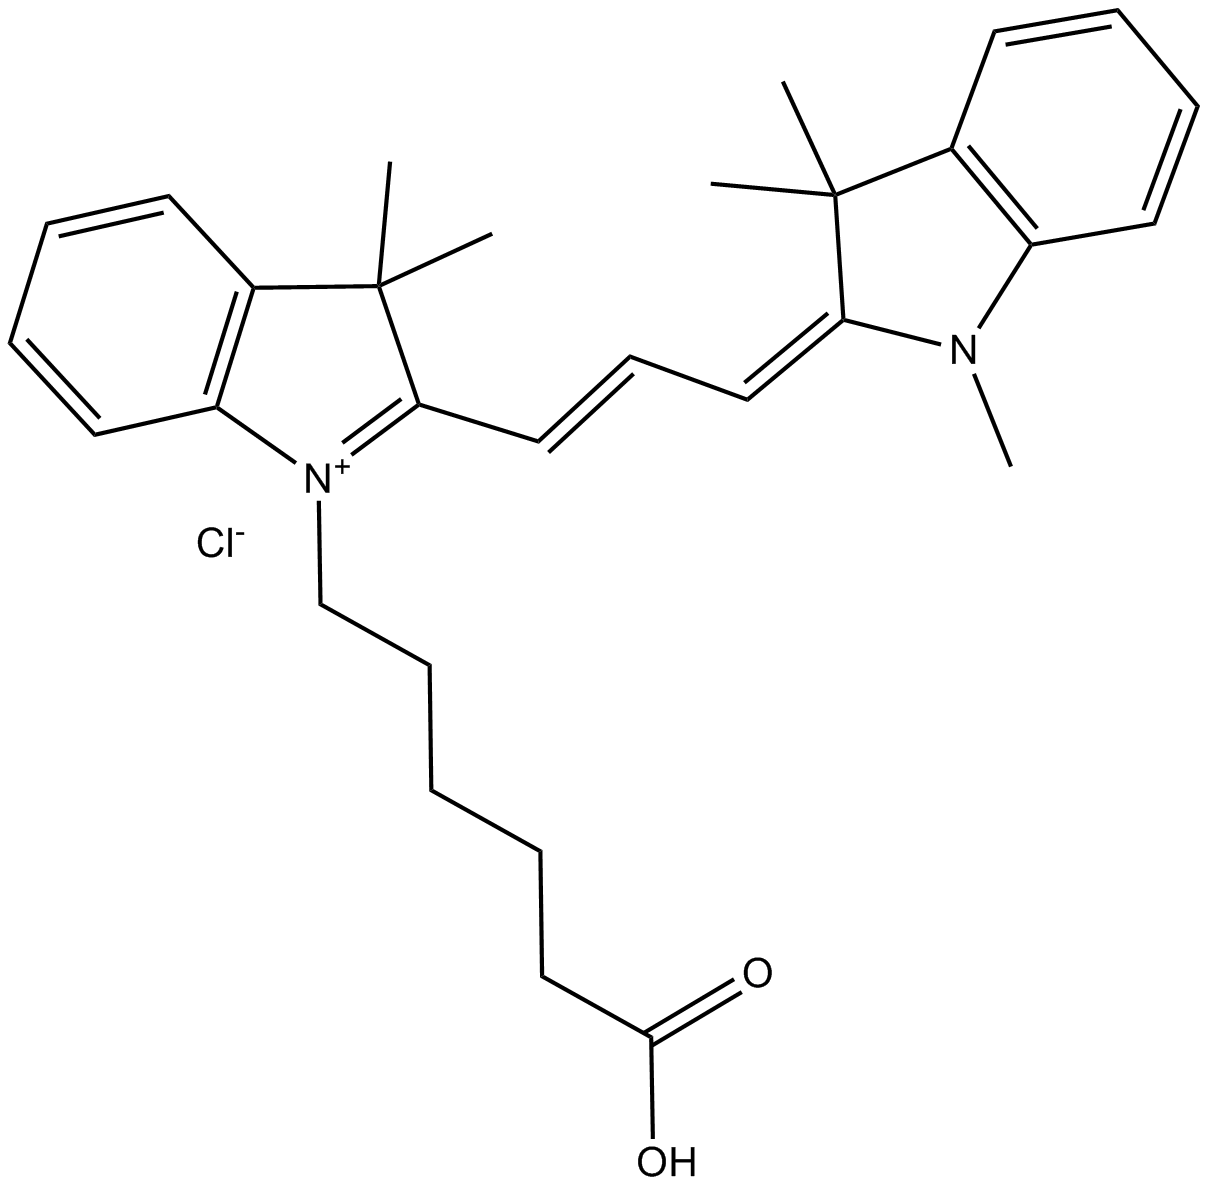 Cy3 carboxylic acid (non-sulfonated)